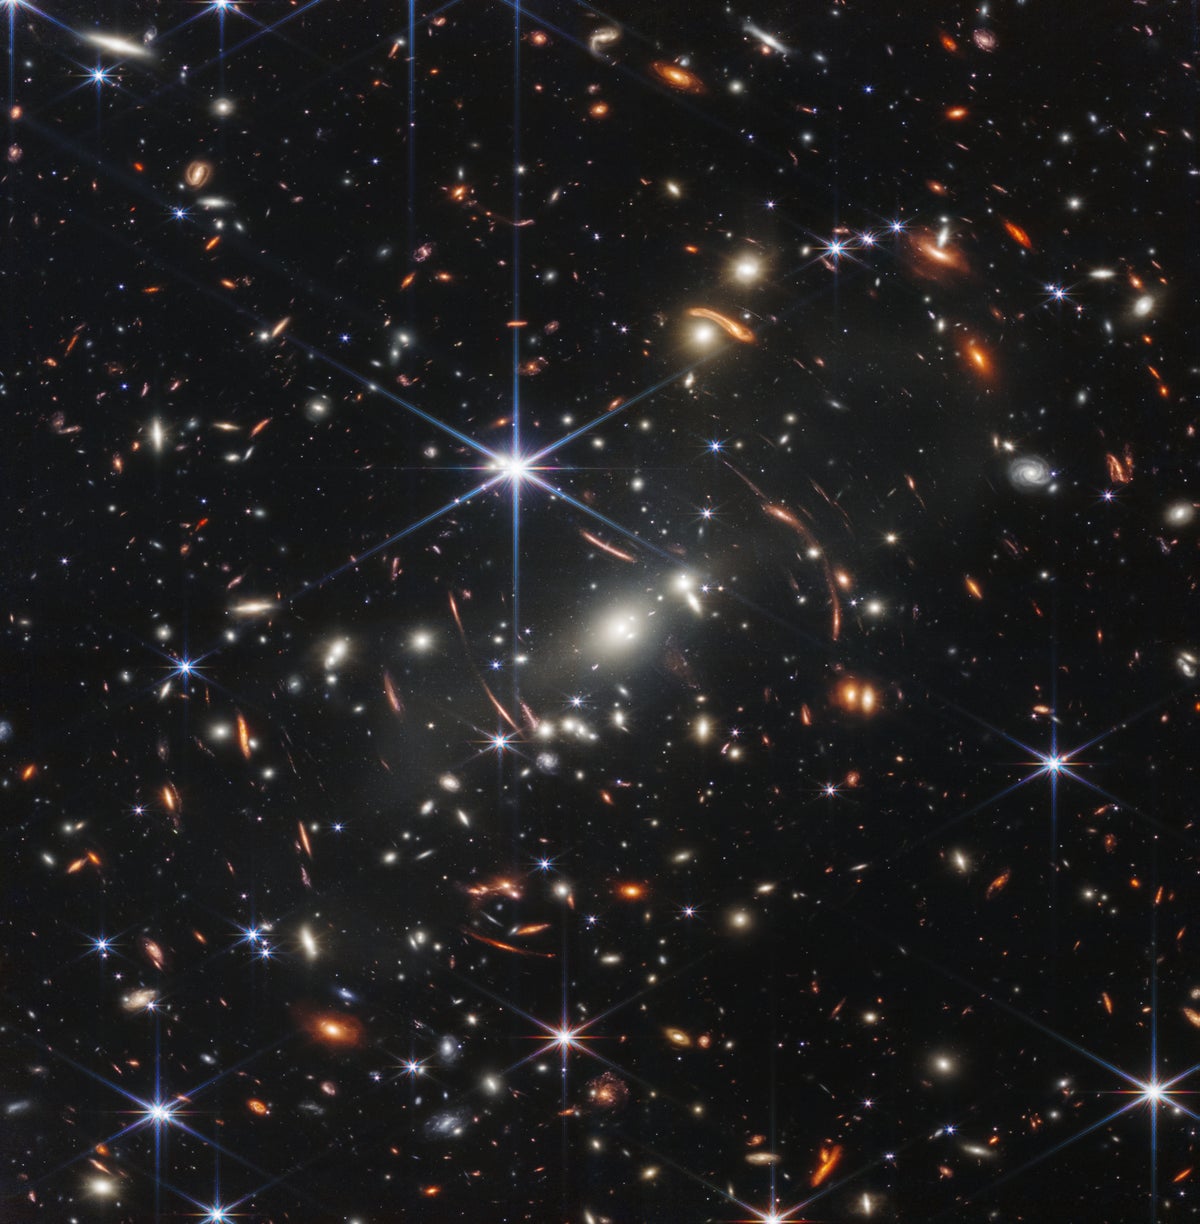 Oldest, deepest recesses of the universe revealed in Nasa’s first James Webb image